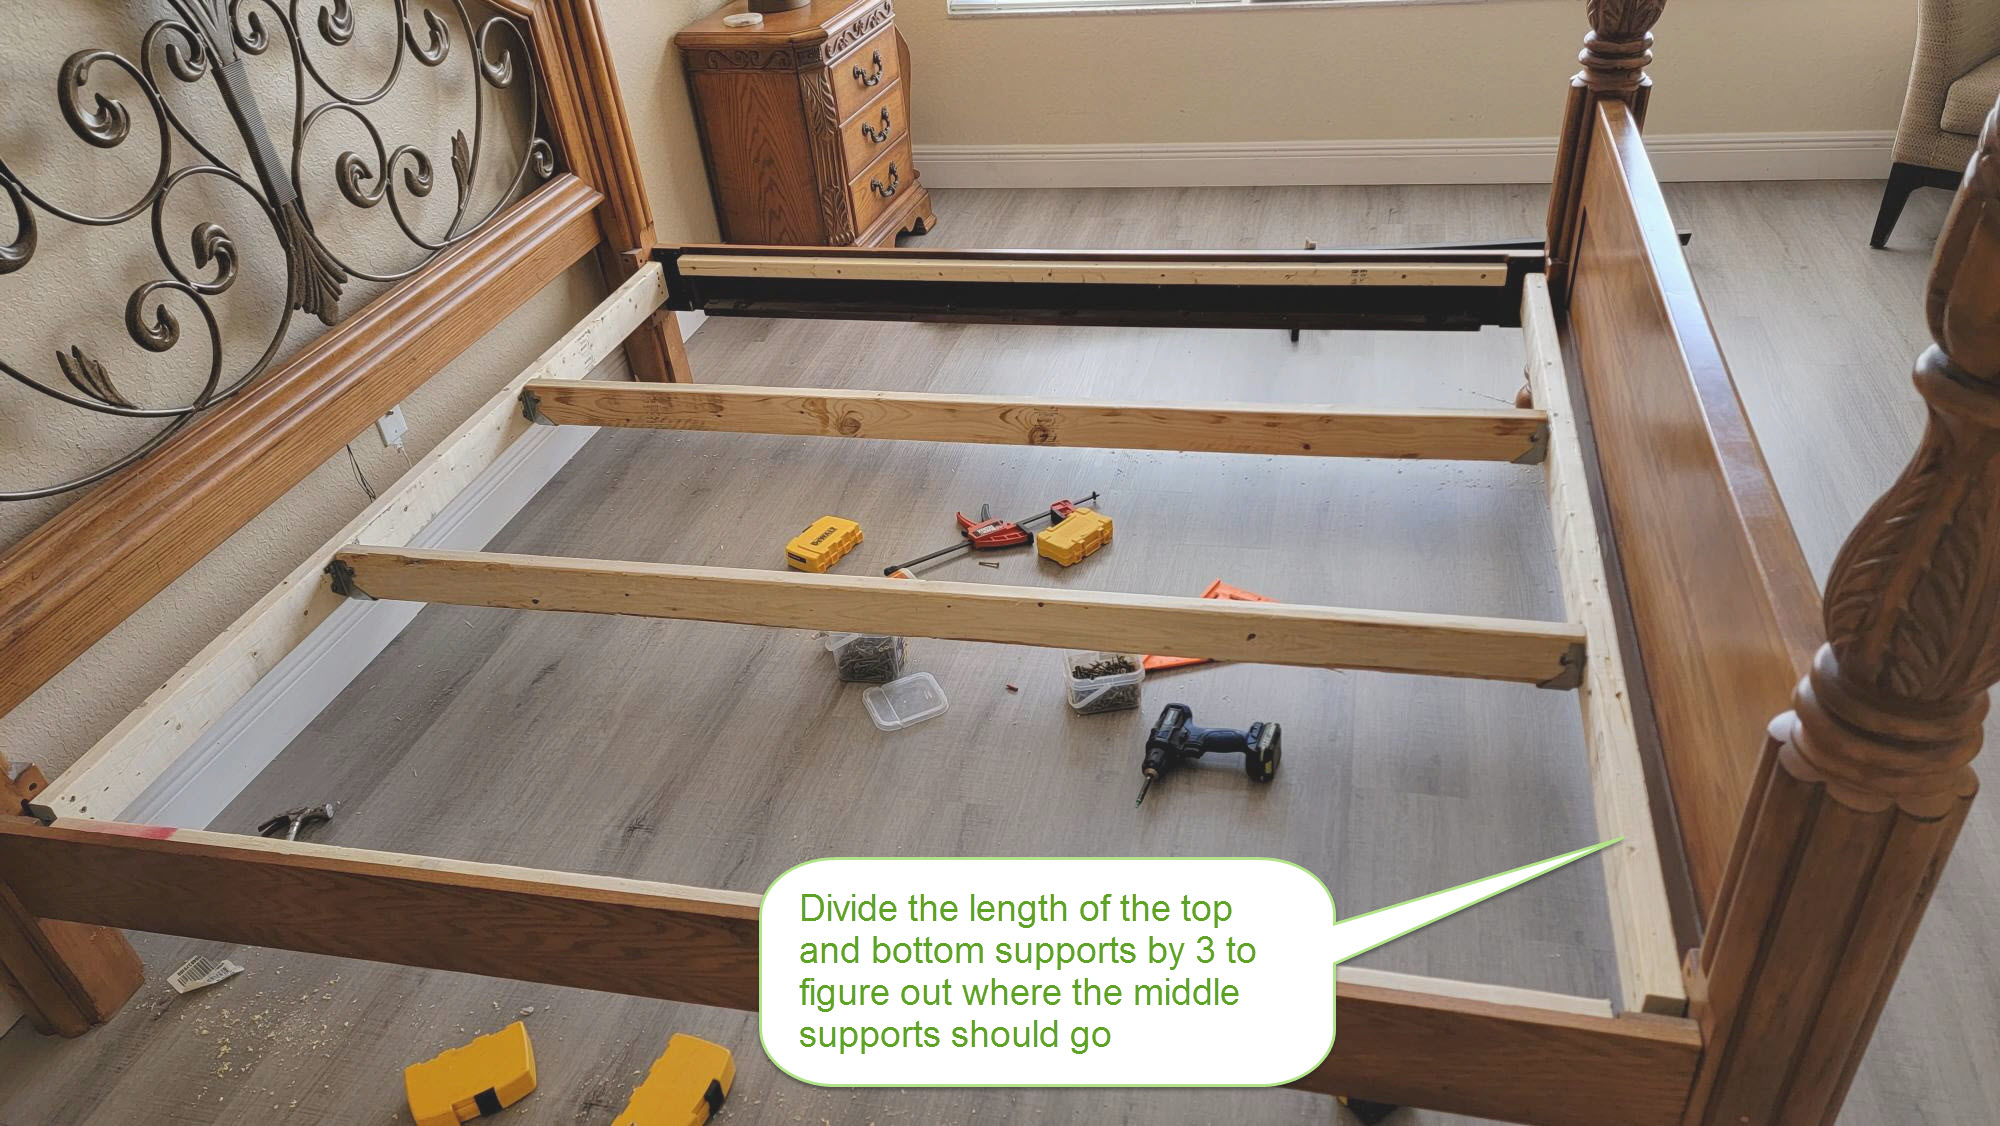 Converting a Box Spring To A Platform Bed - Spacing out the middle supports